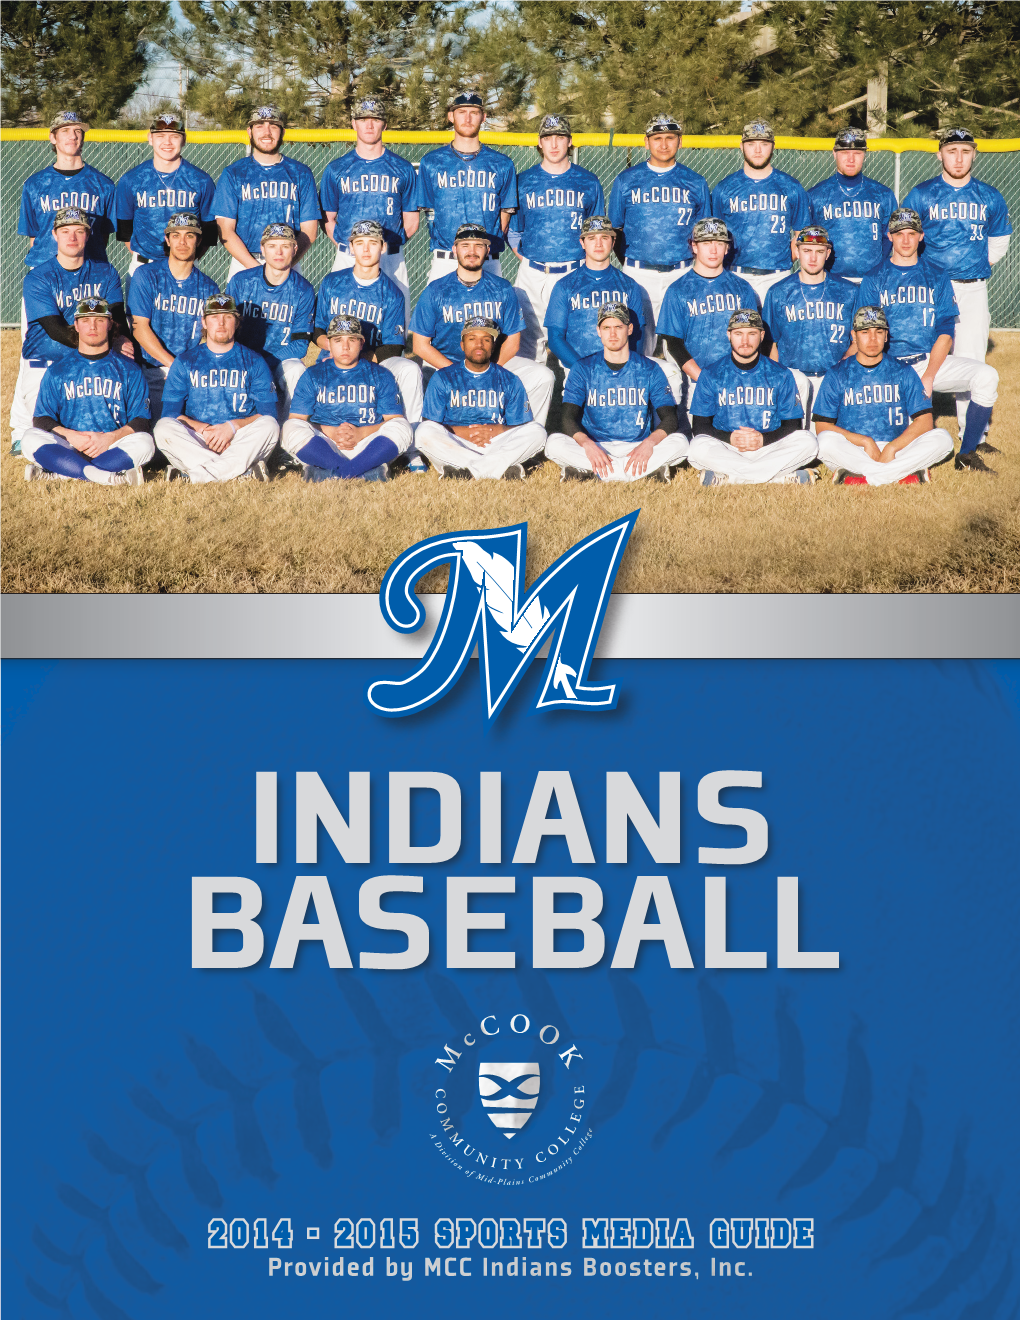 2015 SPORTS MEDIA GUIDE Provided by MCC Indians Boosters, Inc